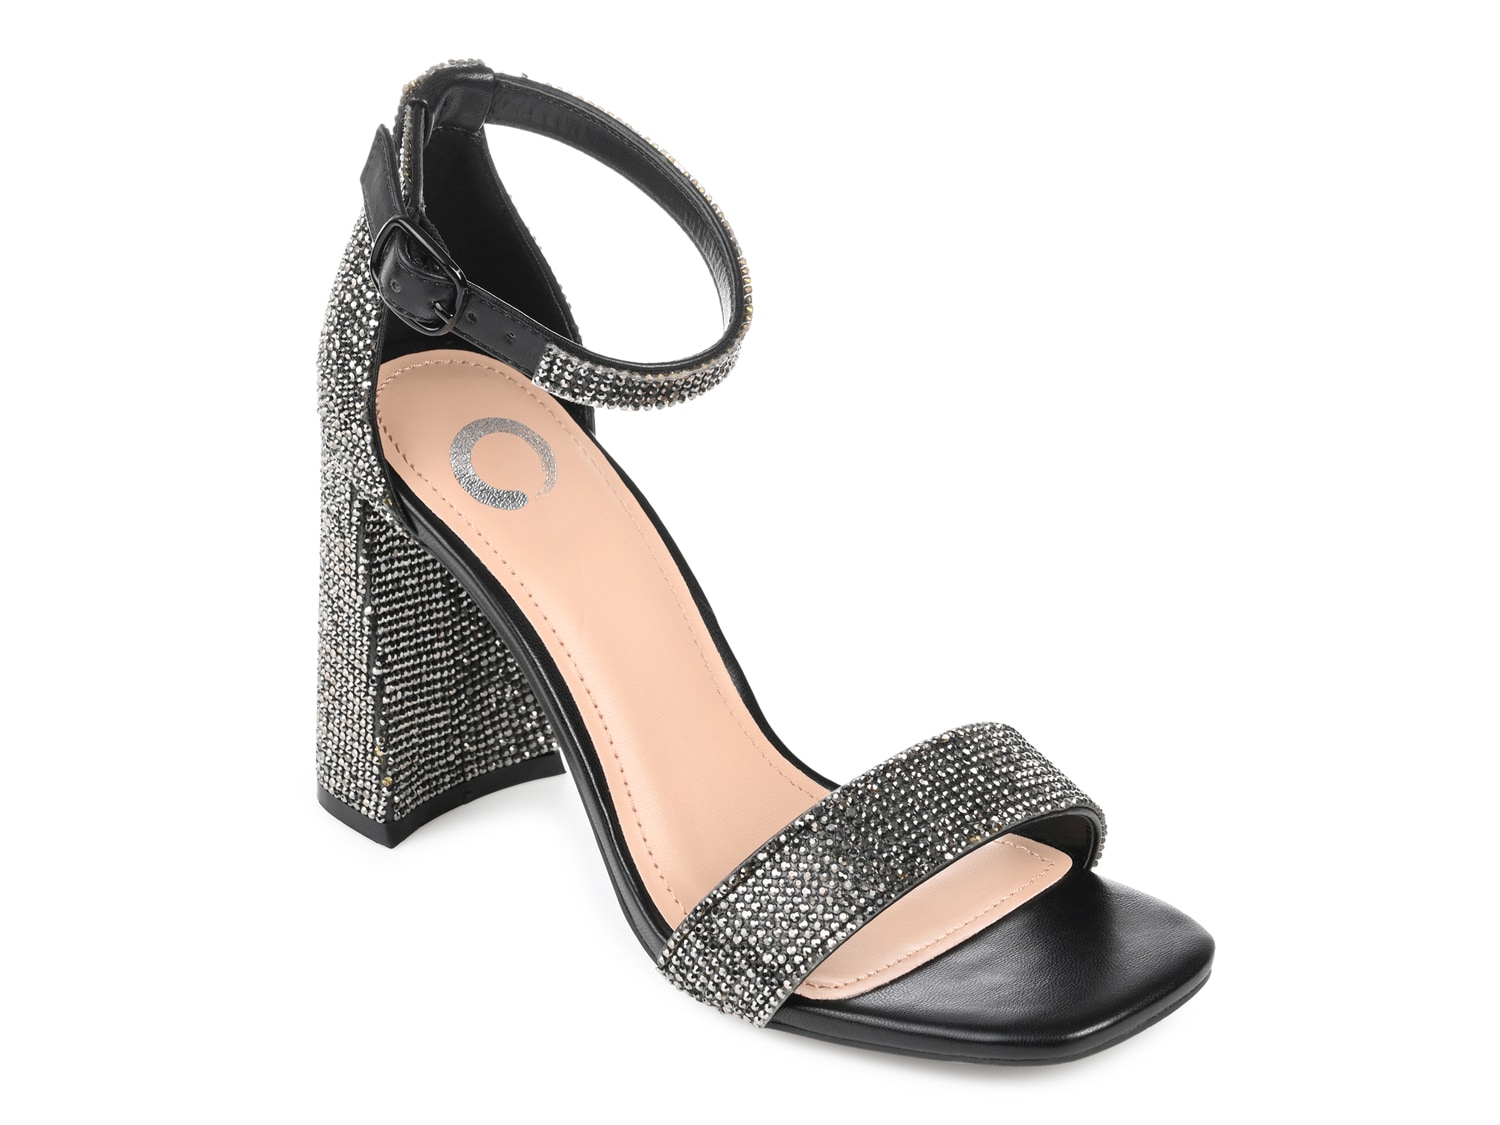 Journee Collection Idda Sandal - Free Shipping | DSW